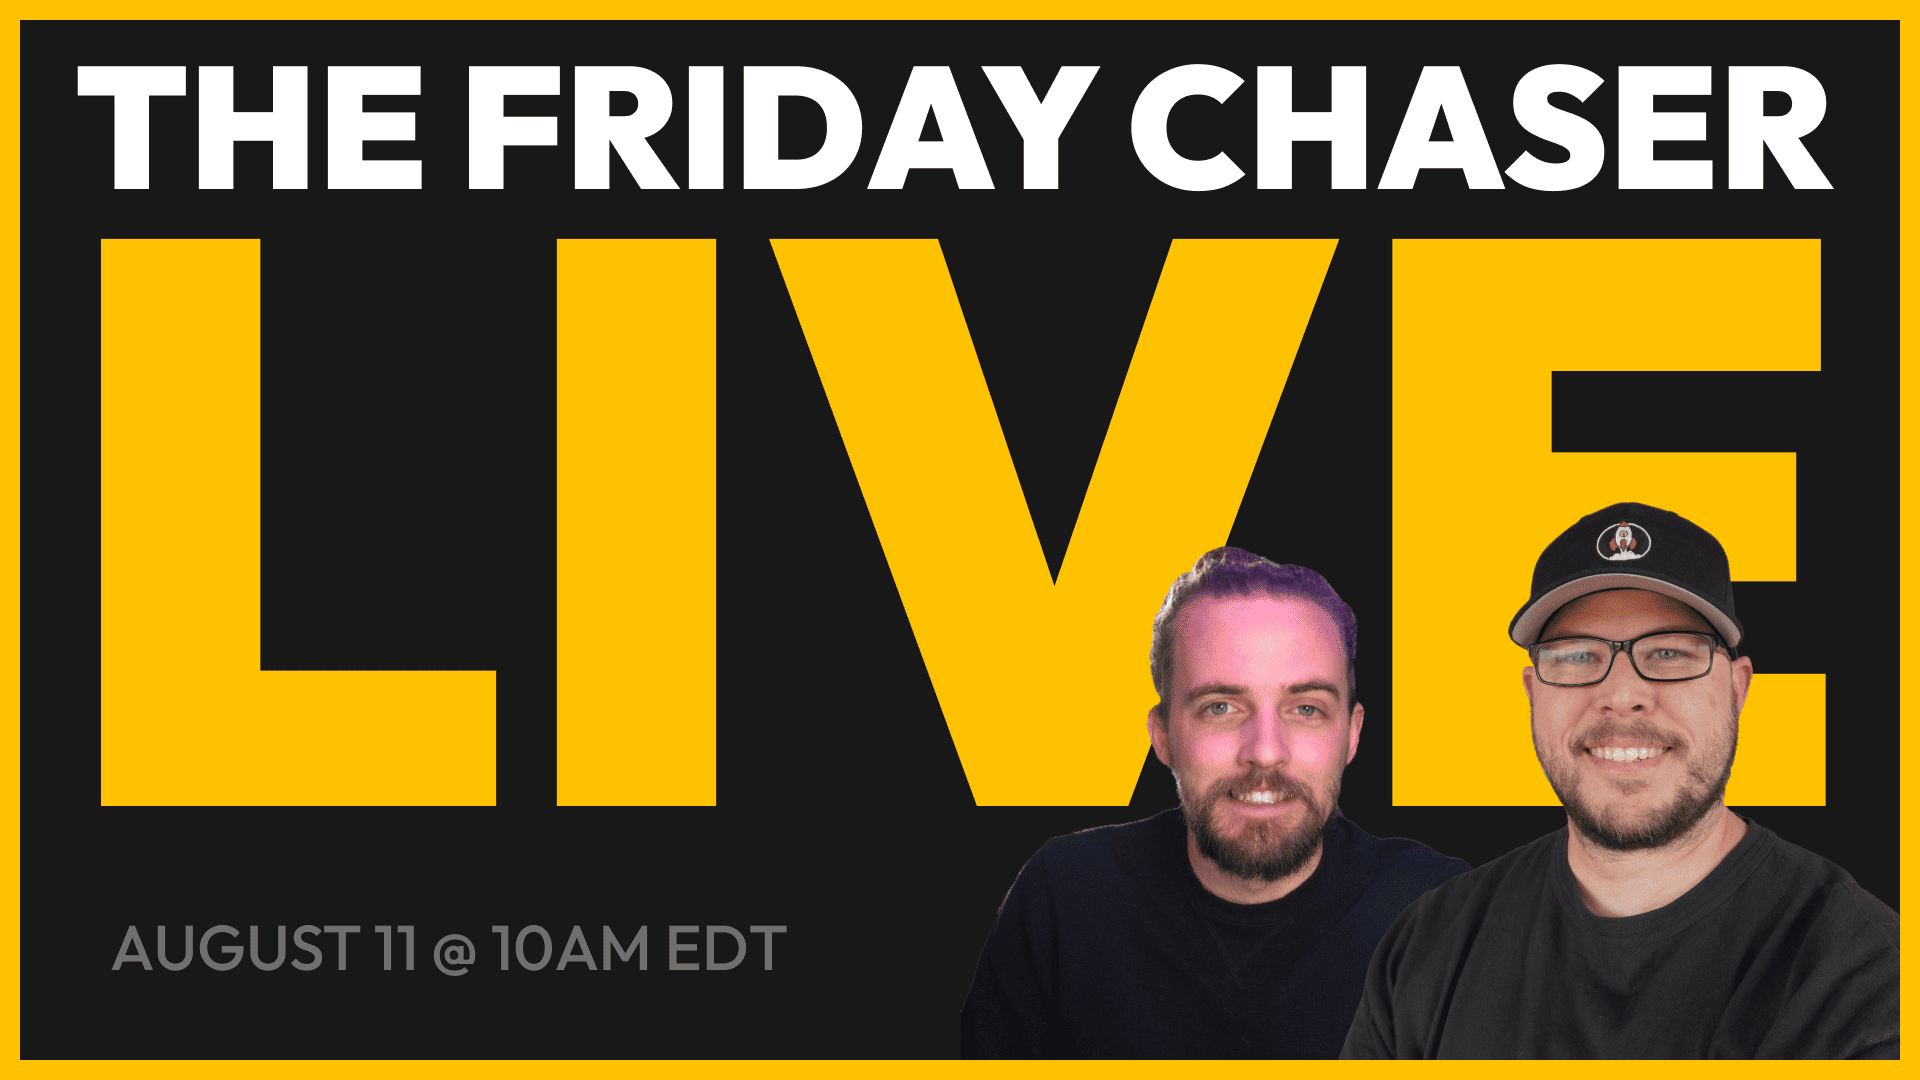 The Friday Chaser Live